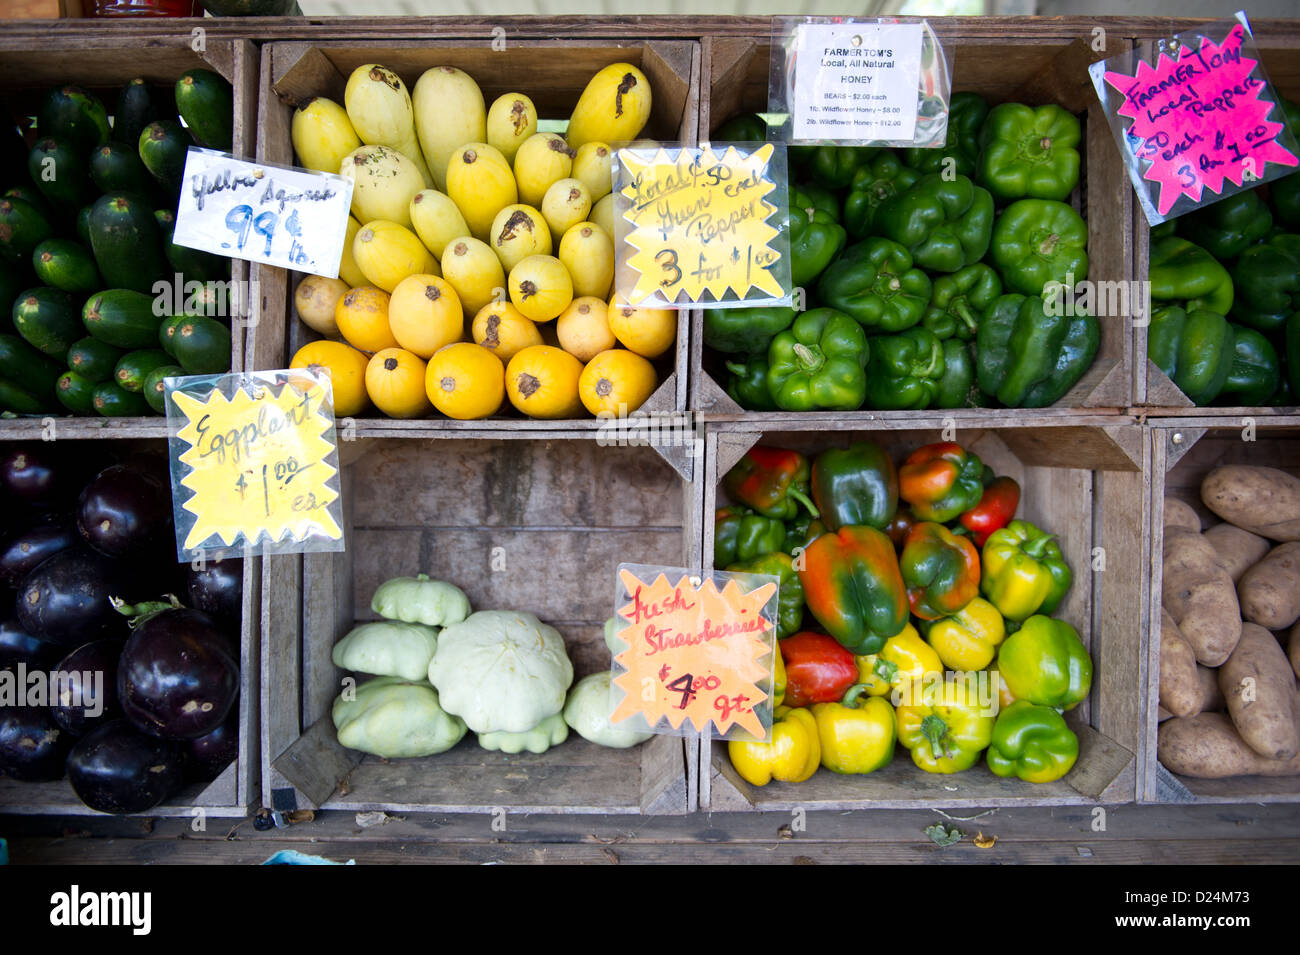 Crates of produce and vegetables Stock Photo